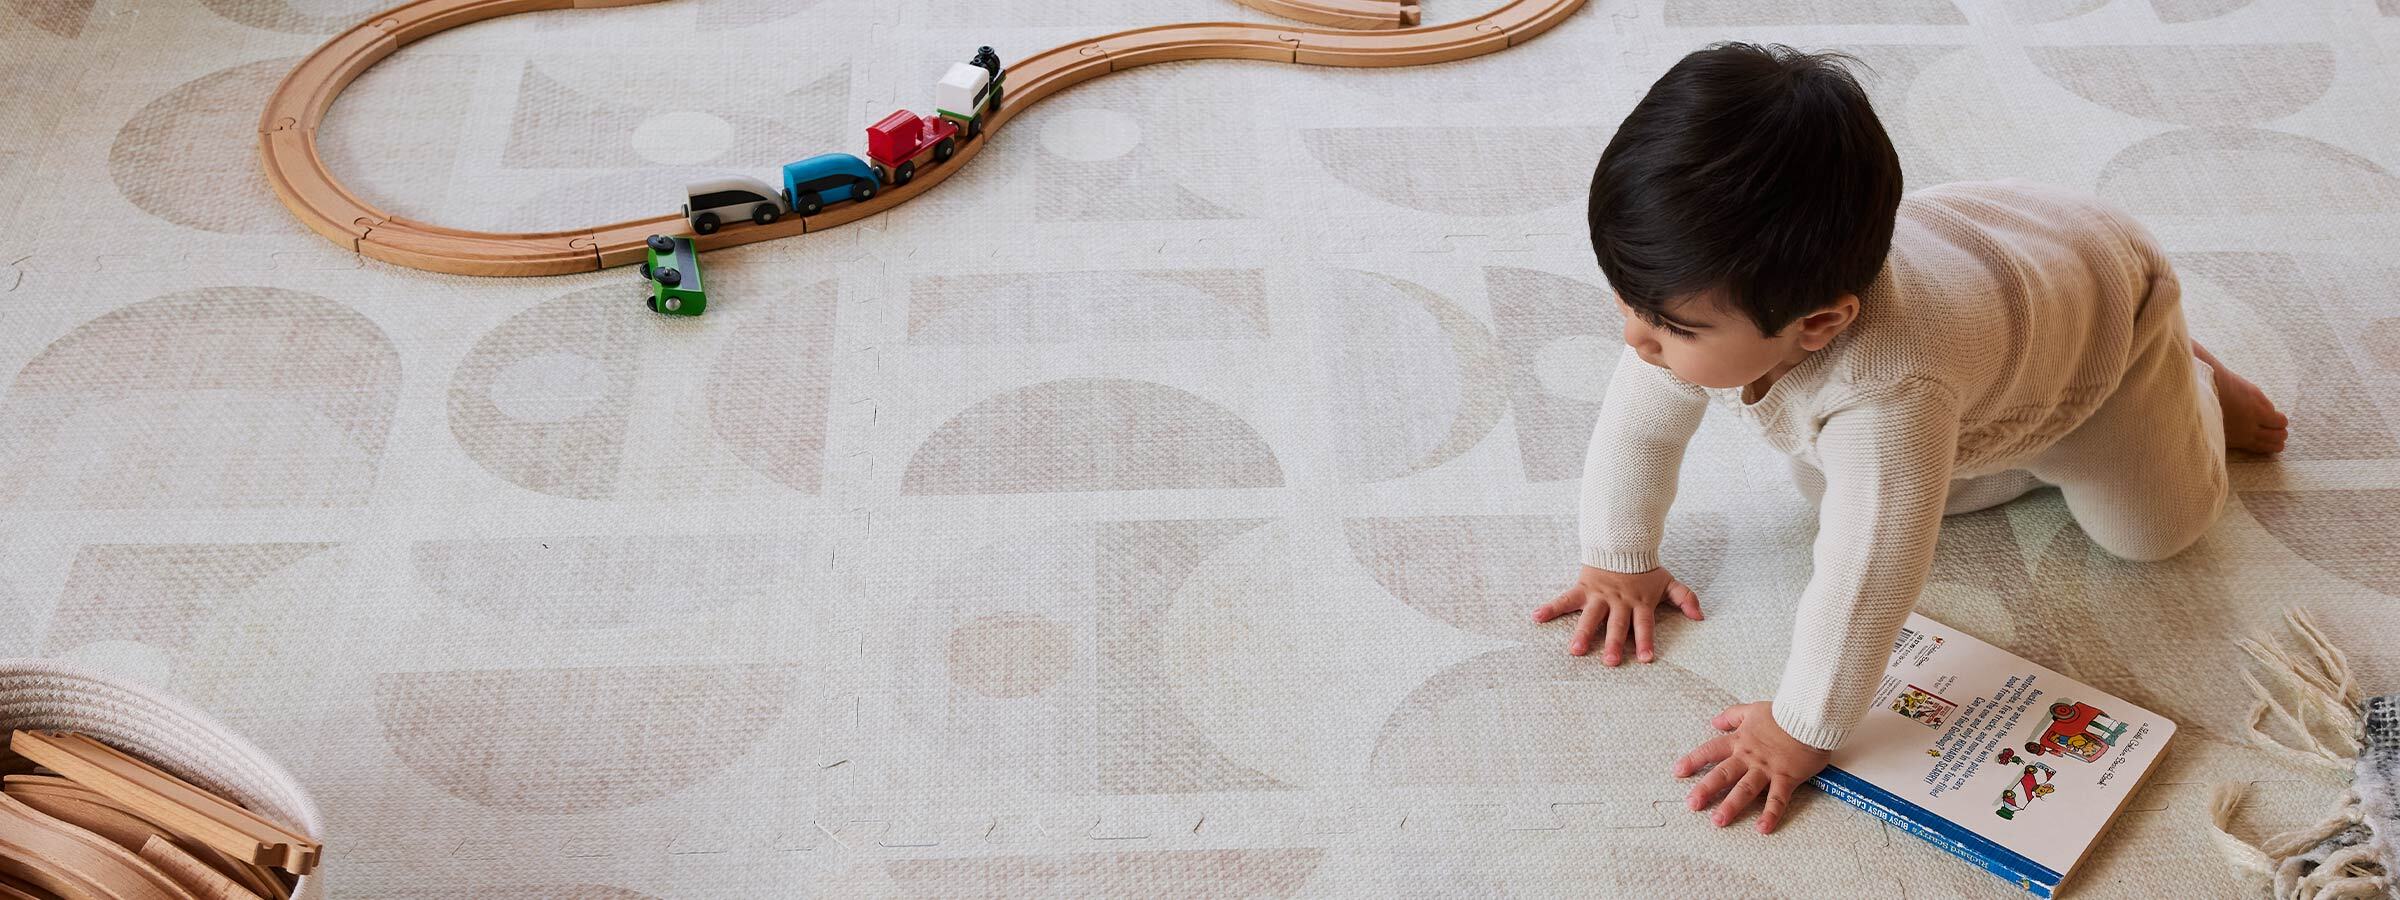 Ada Pebble neutral geometric print play mat shown from above with baby crawling across mat over wooden blocks